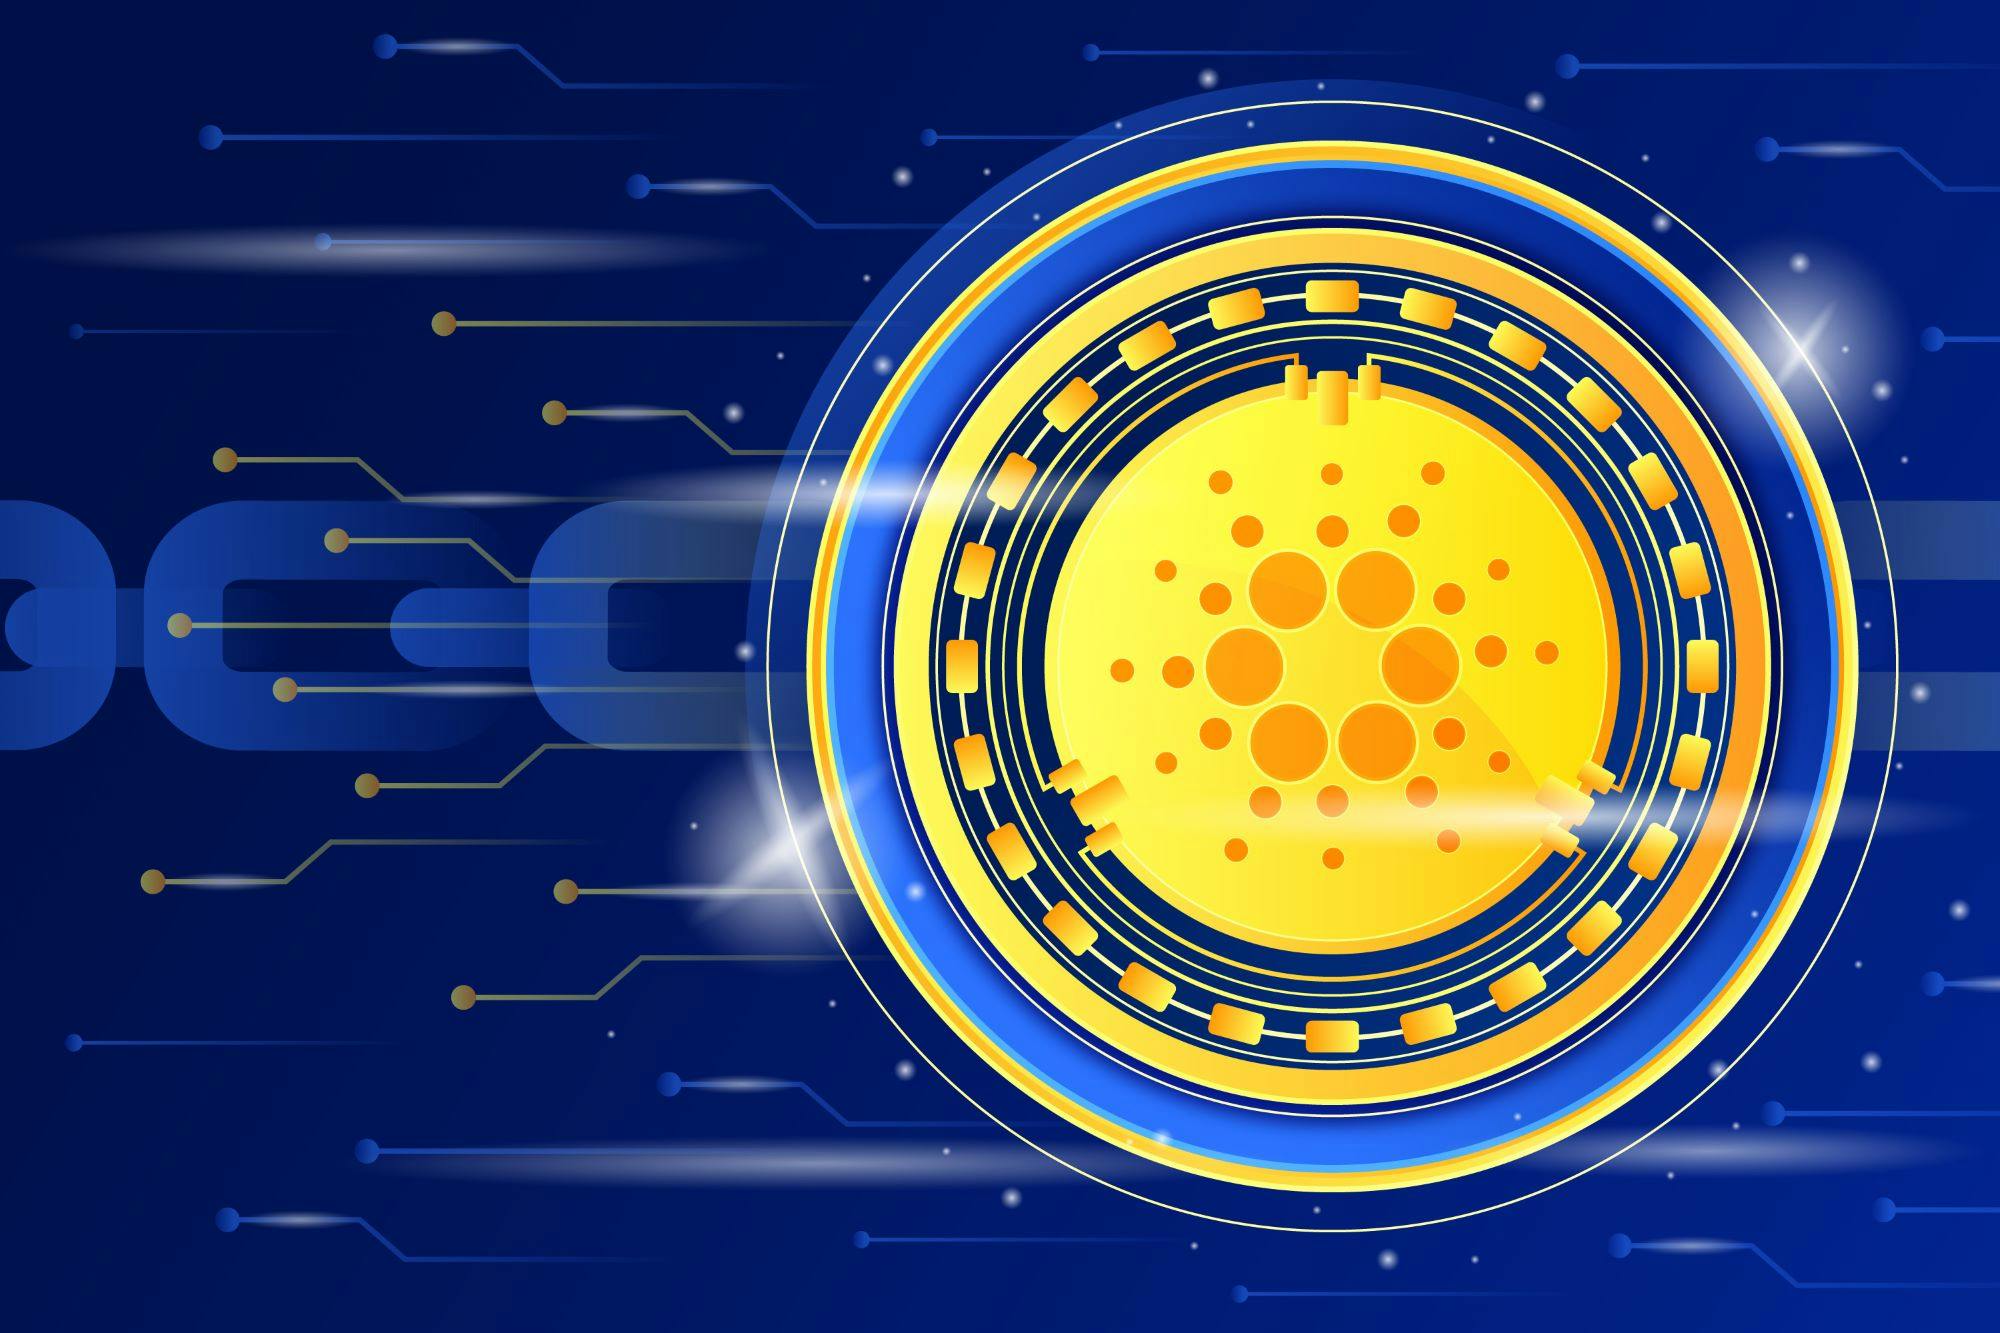 How Will Cardano Change The Crypto Landscape in 2023